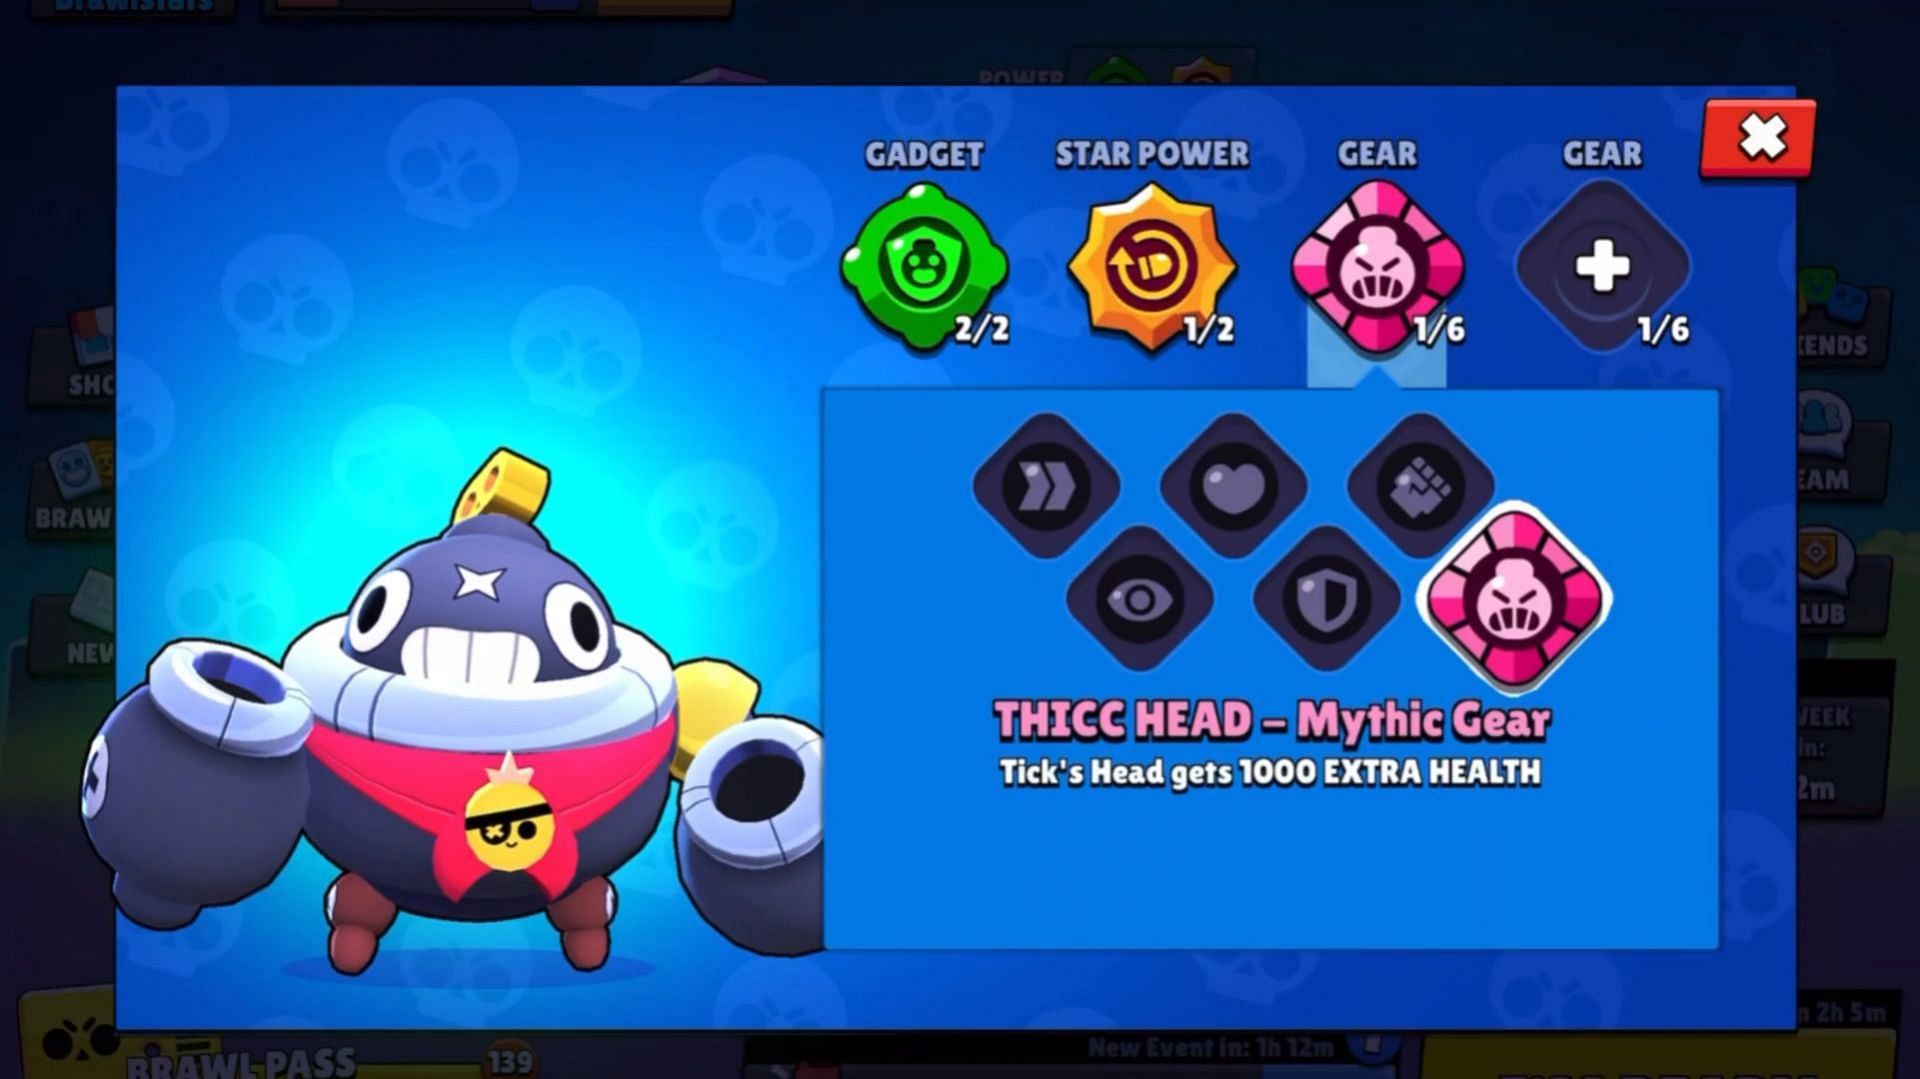 Thicc Head Mythic Gear (Image via Supercell)